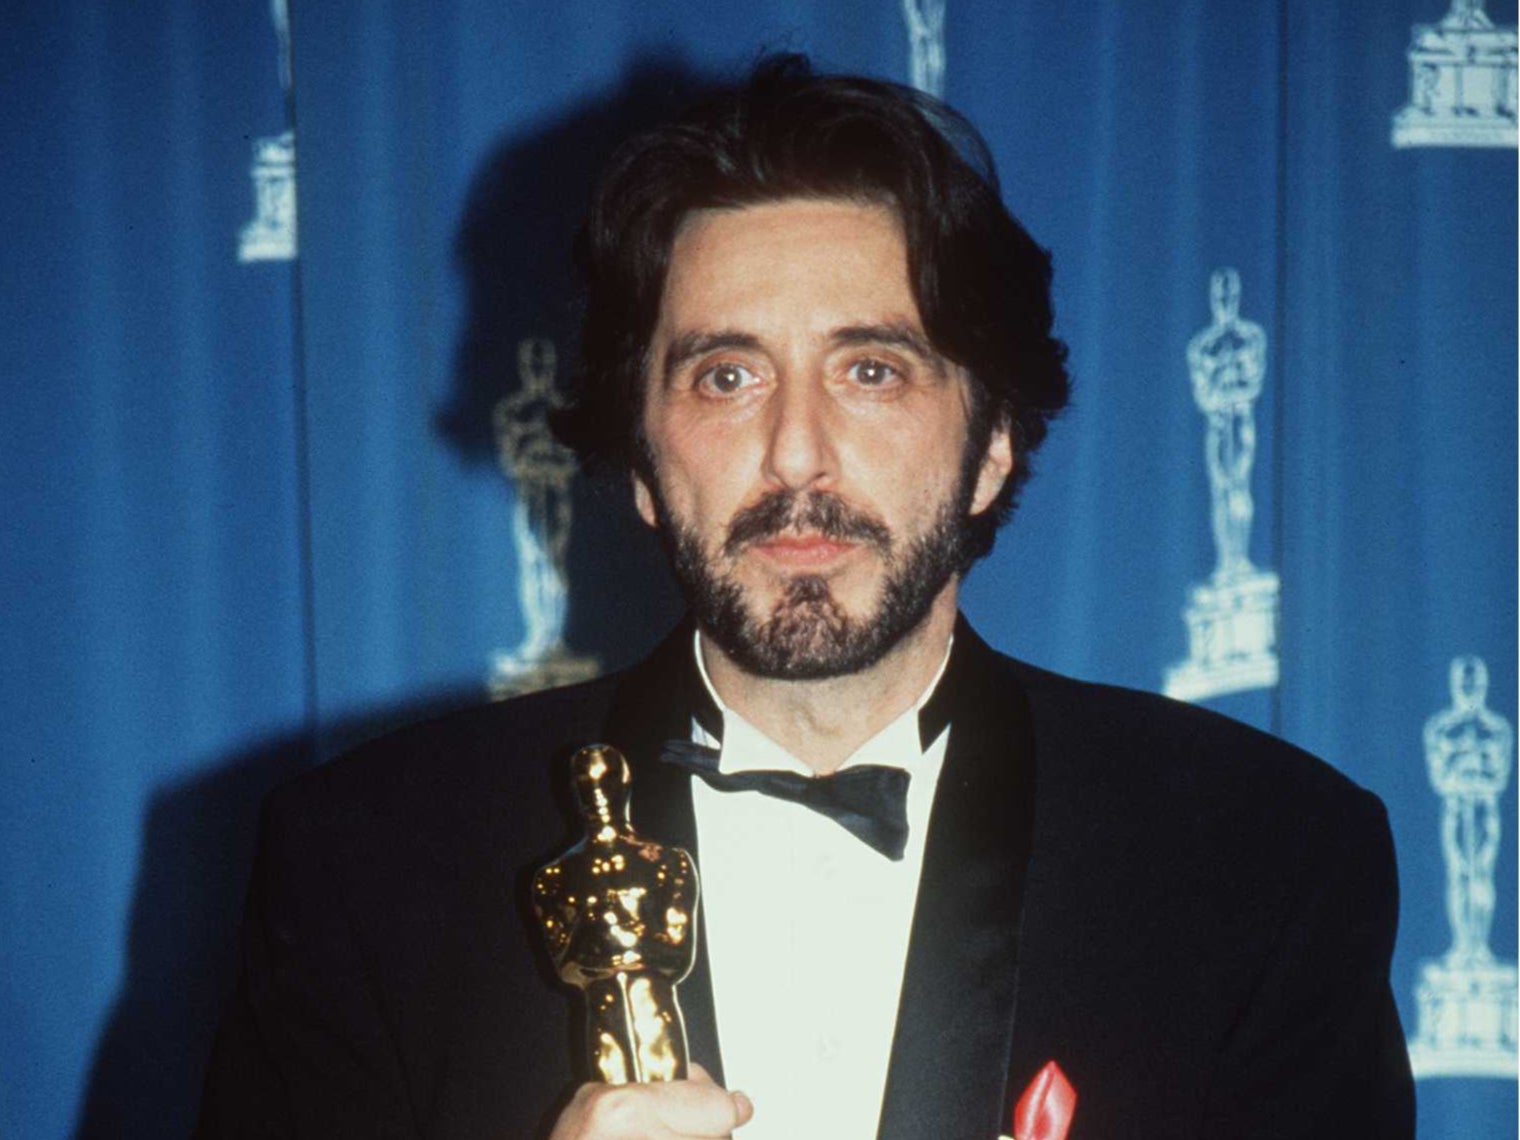 Al Pacino won the Academy Award for Best Actor for ‘Scent Of A Woman’ in 1993